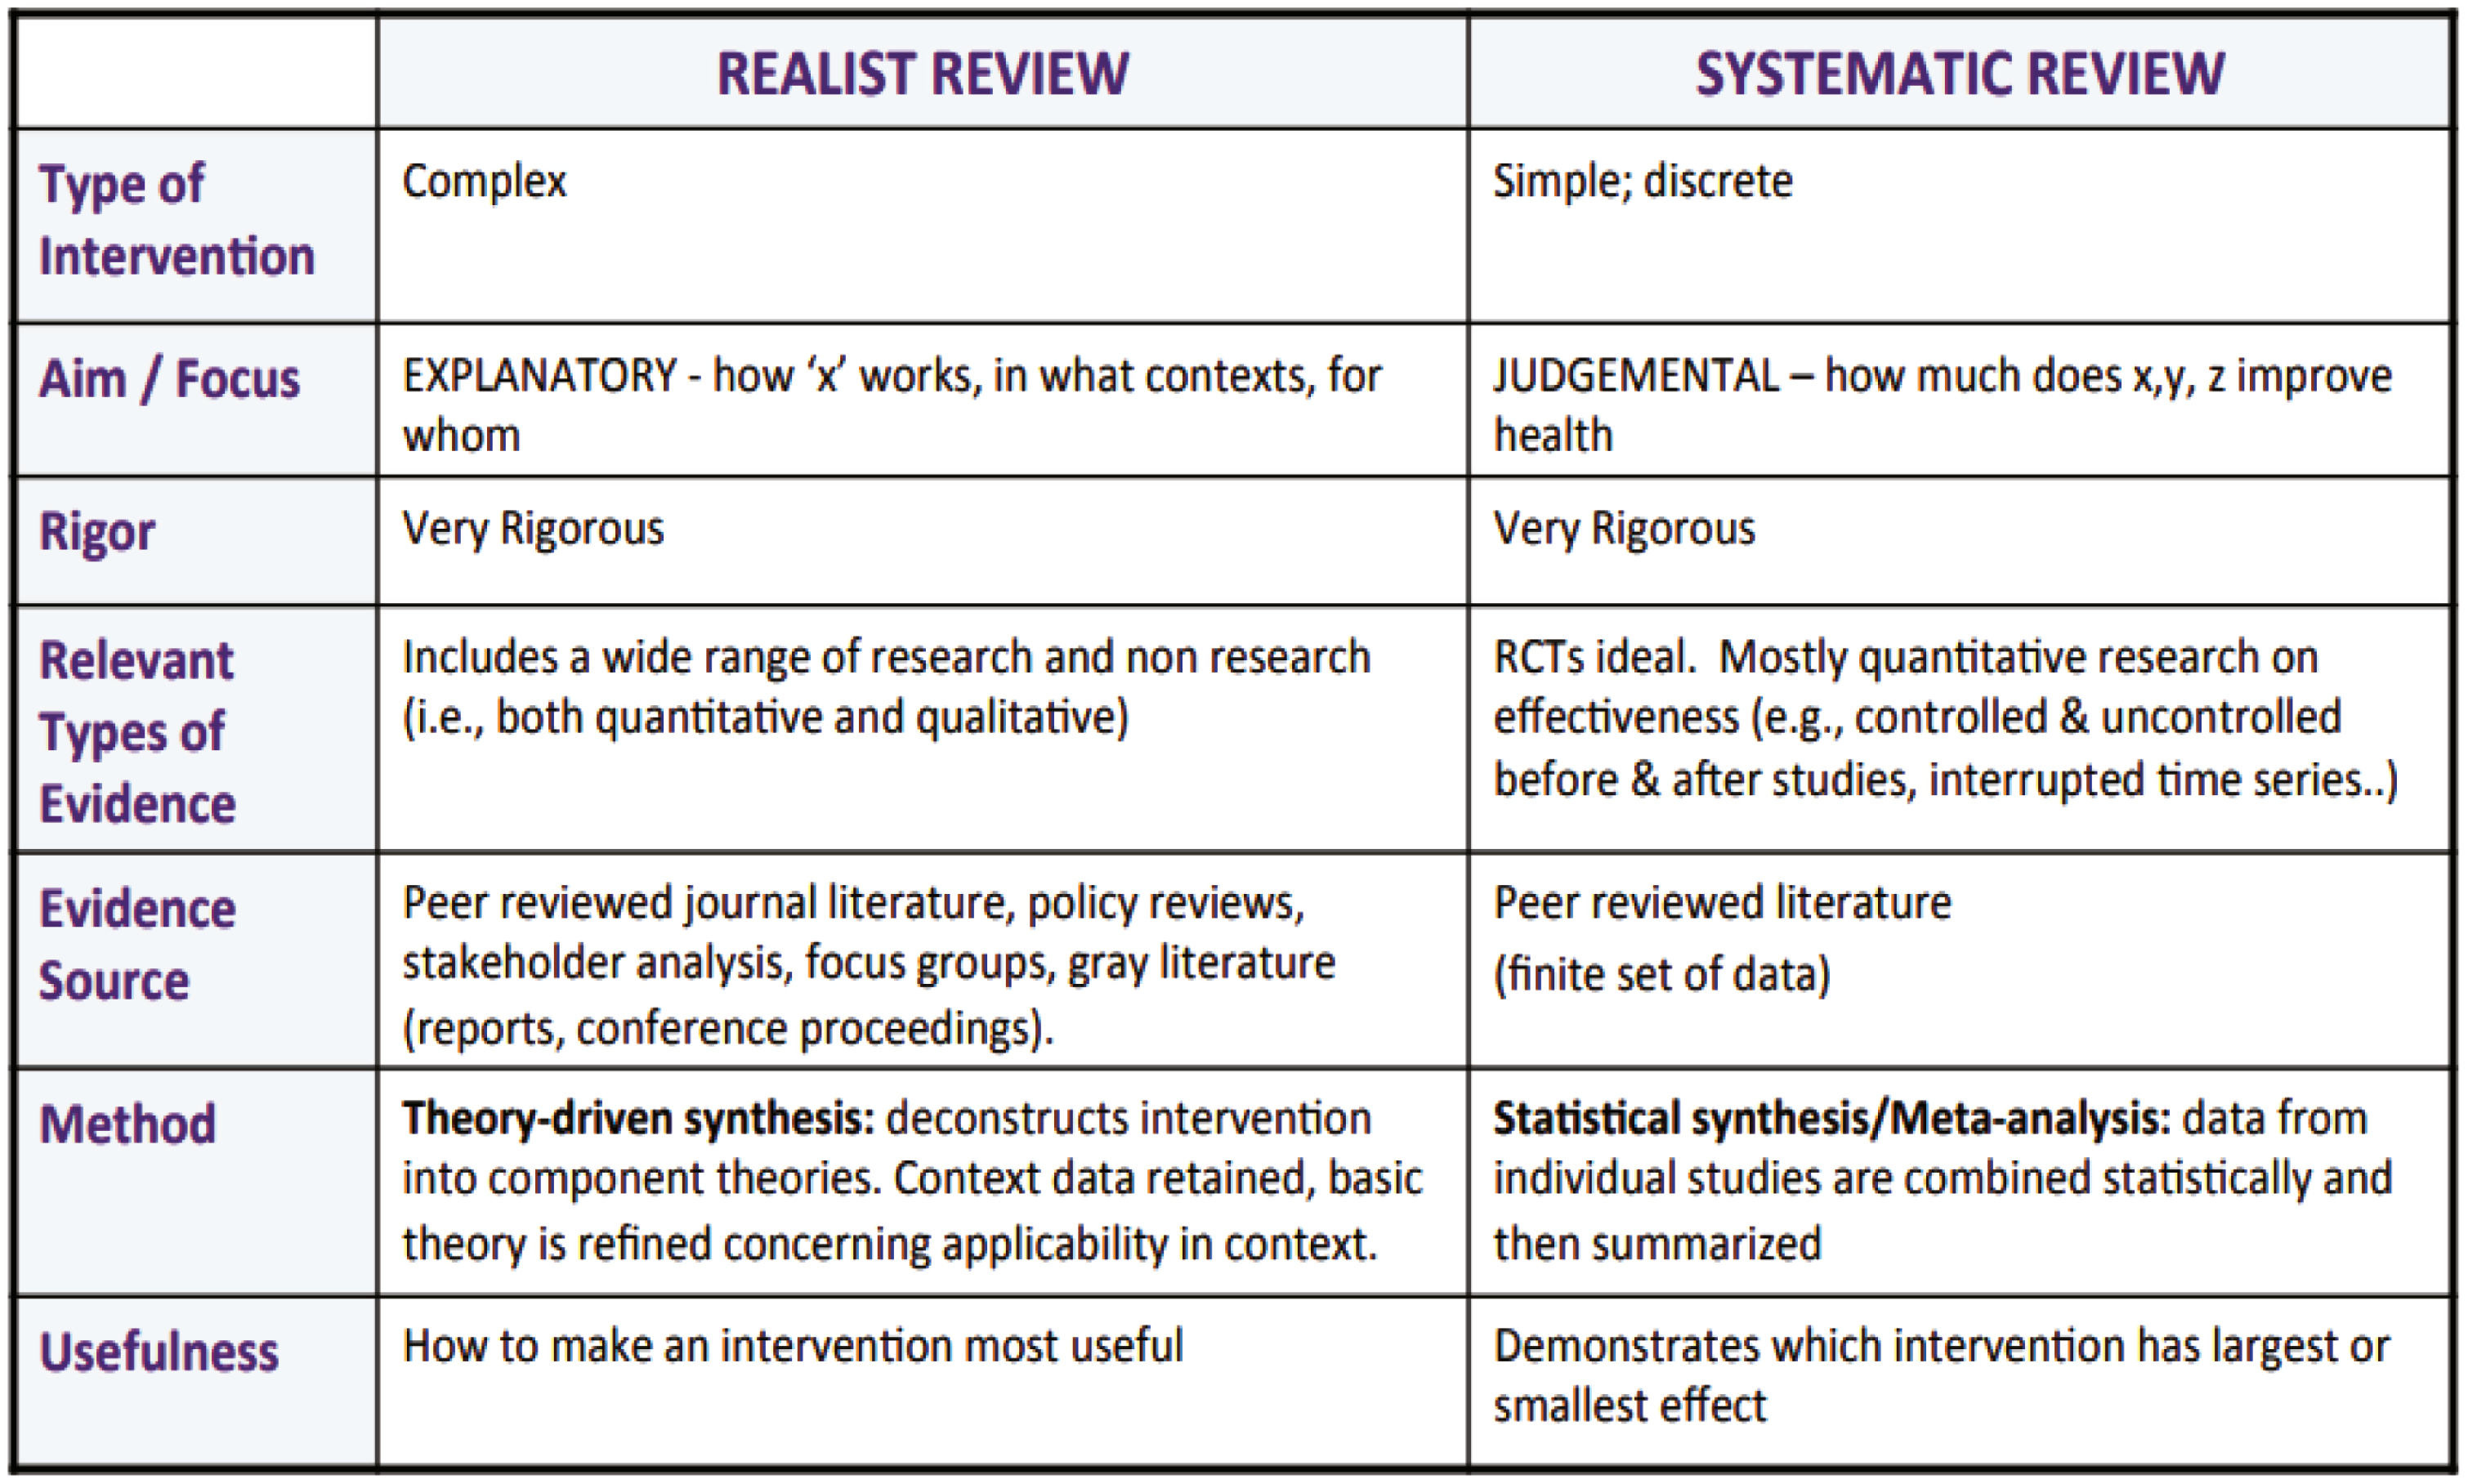 Realist review compared to systematic review [42]